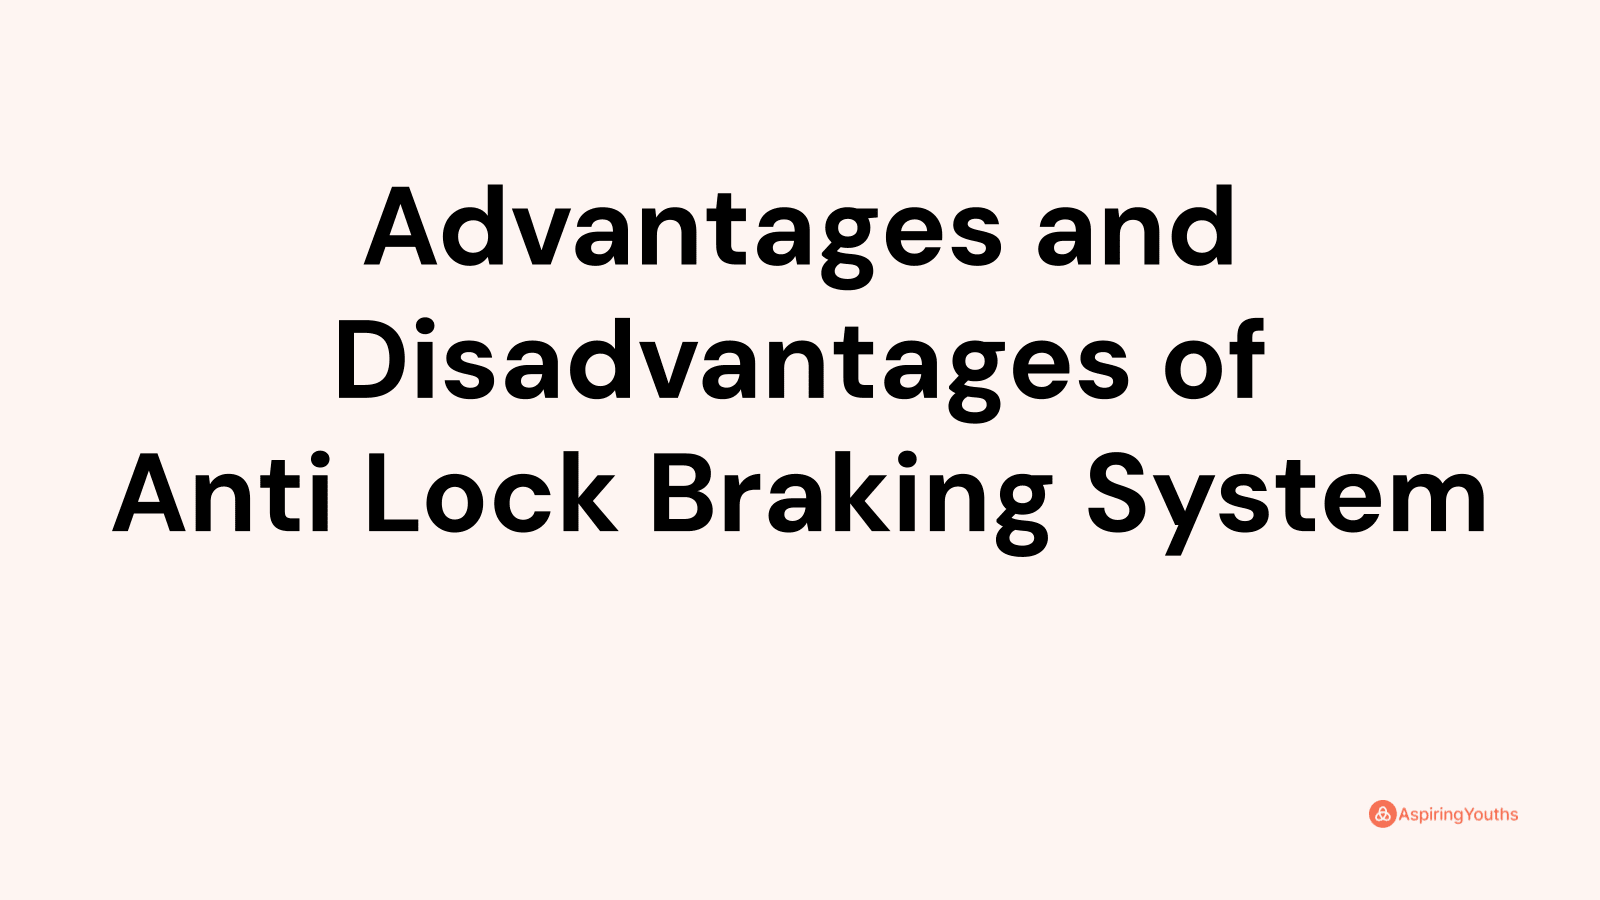 Advantages and disadvantages of Anti Lock Braking System